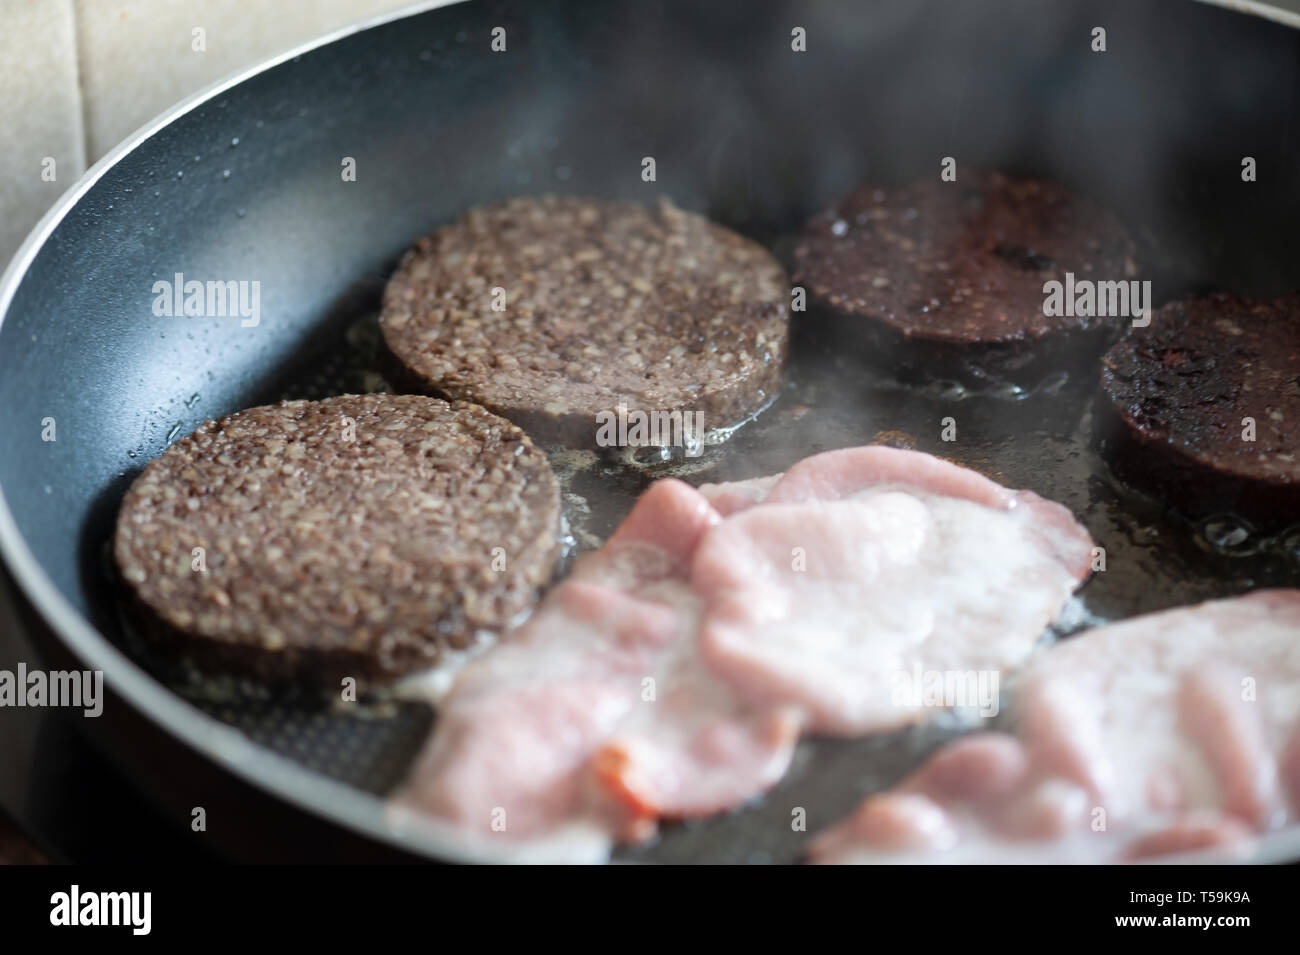 https://c8.alamy.com/comp/T59K9A/bacon-sizzling-in-a-pan-with-black-pudding-and-sliced-haggis-a-fried-breakfast-in-the-making-T59K9A.jpg